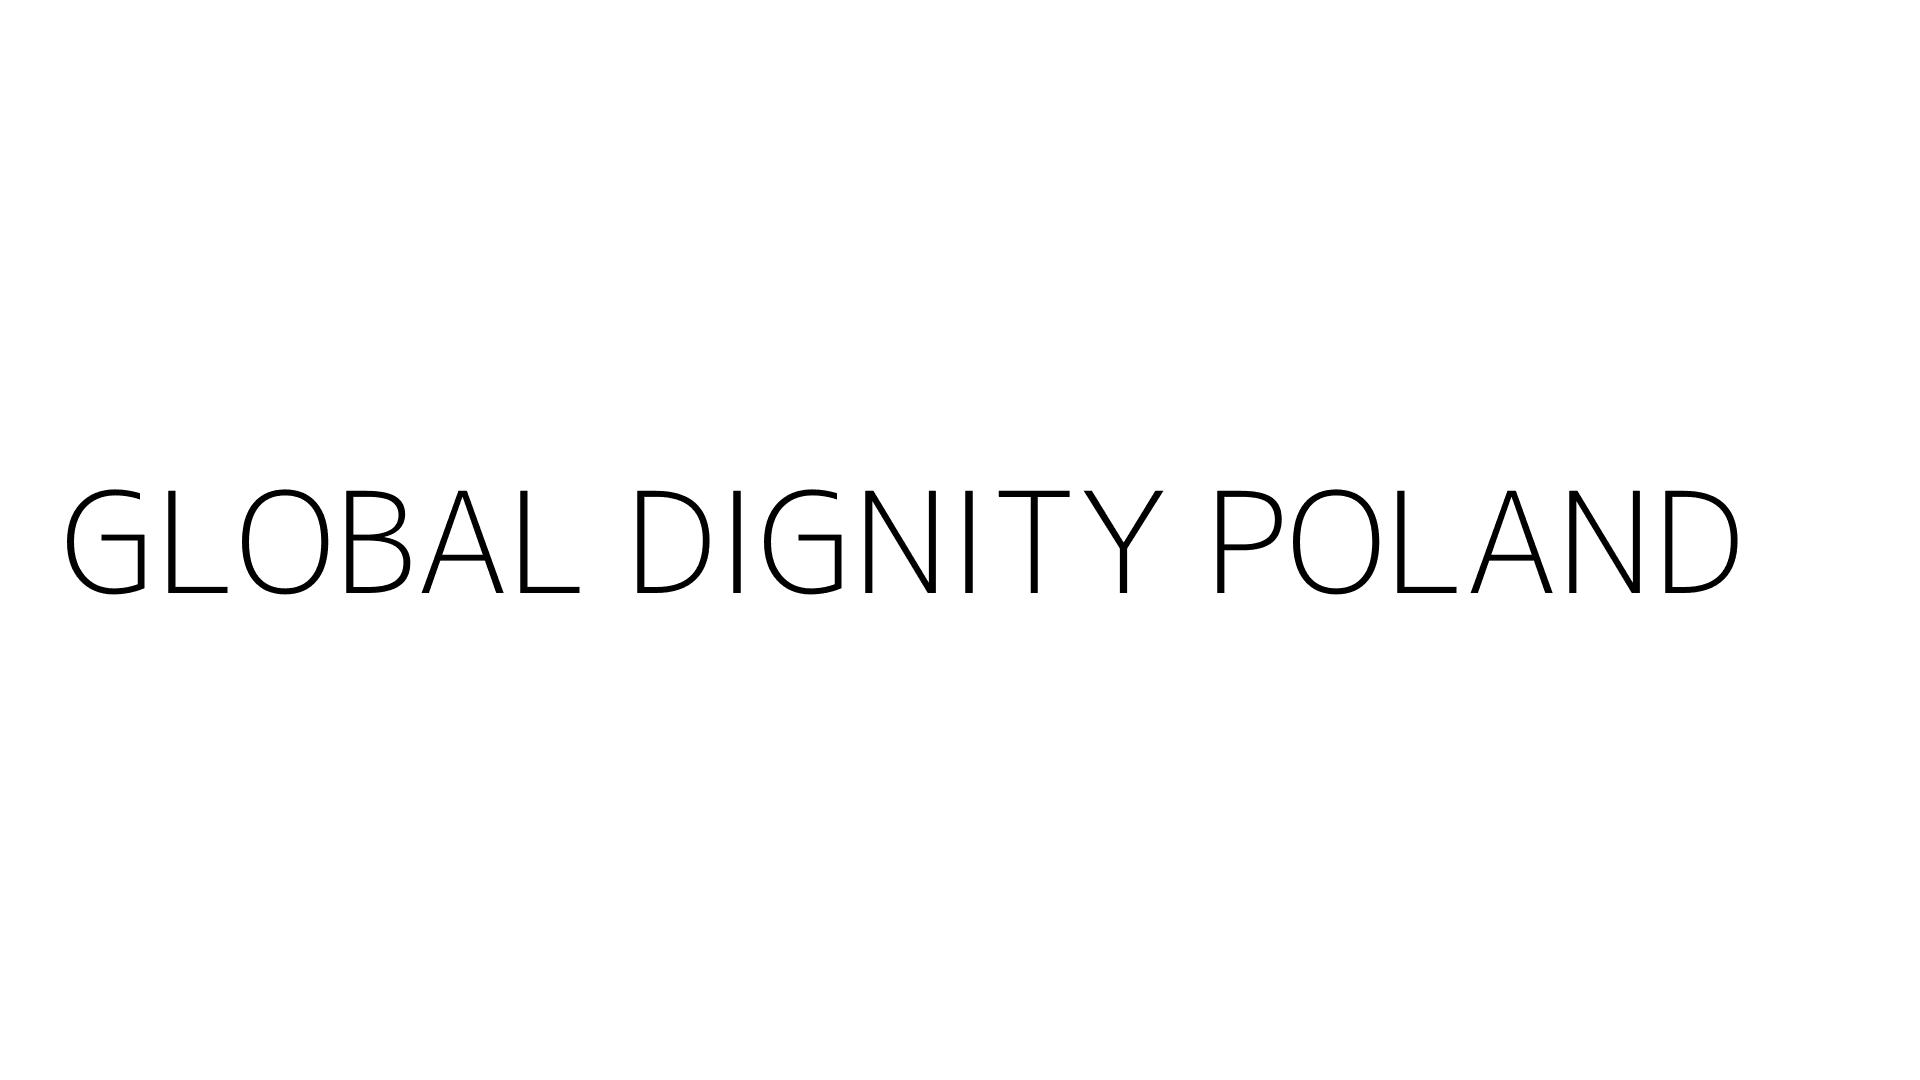 GLOBAL DIGNITY POLAND